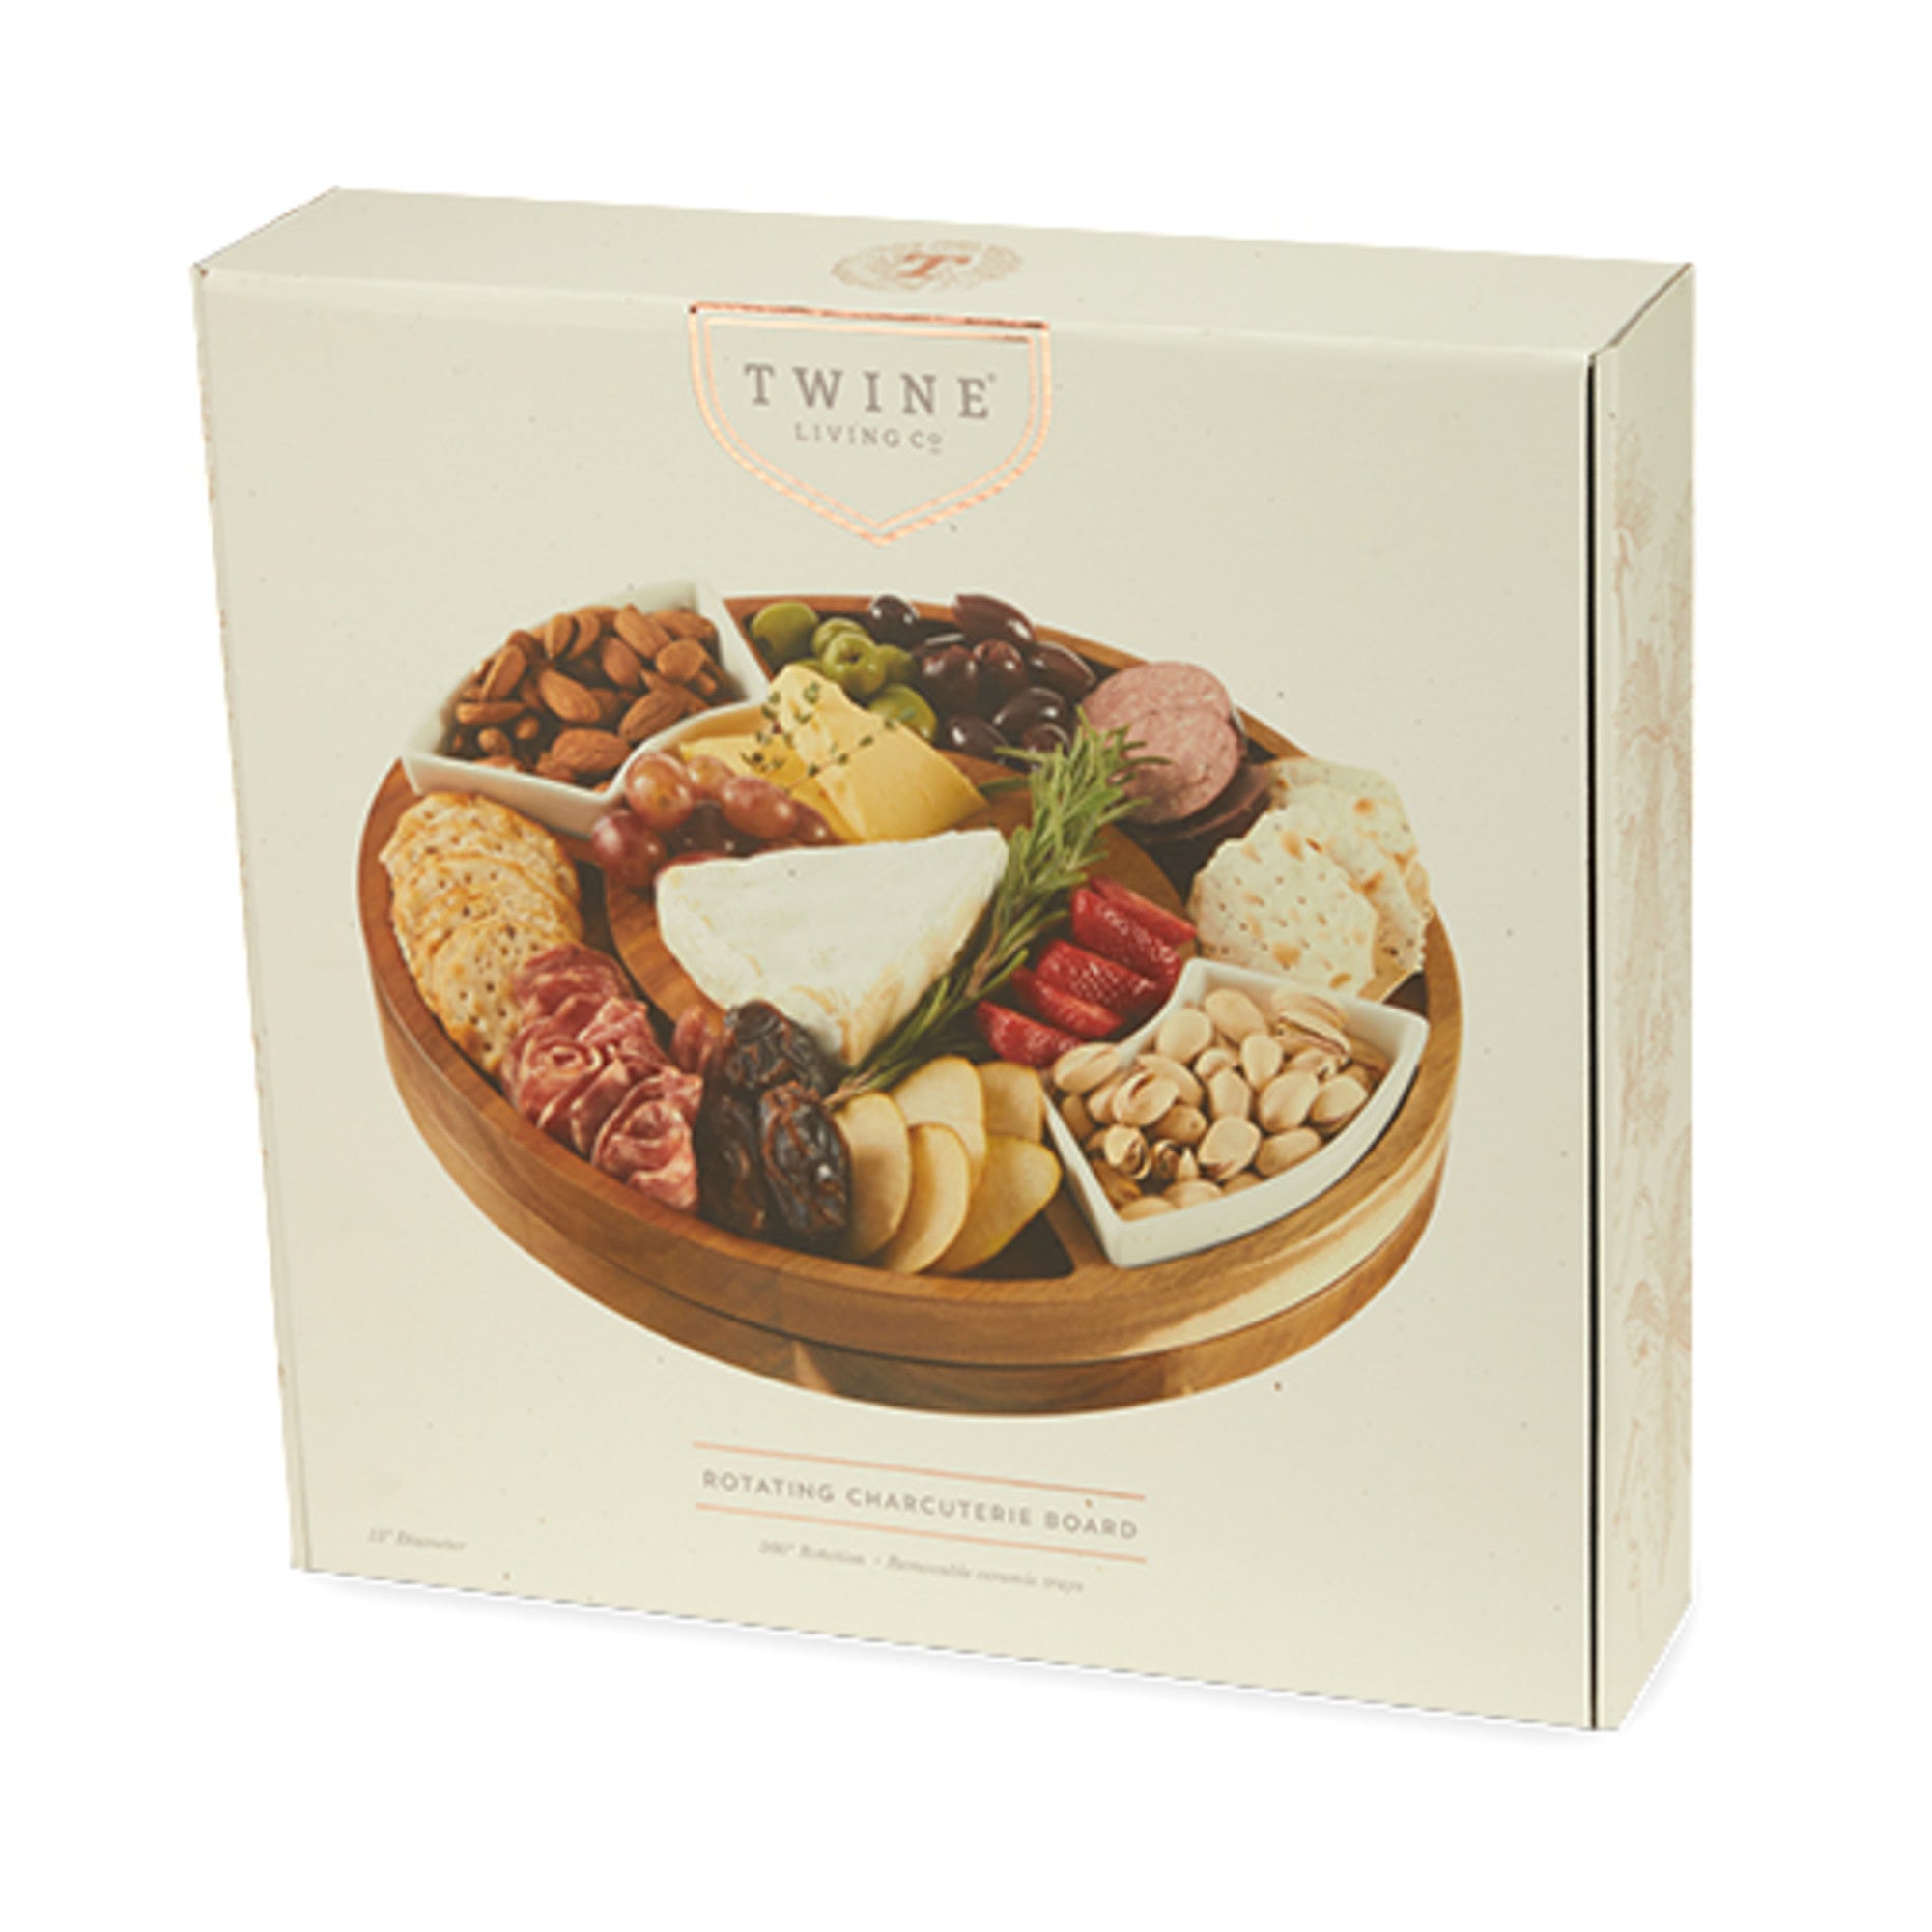 Rotating Charcuterie Board by Twine Living®